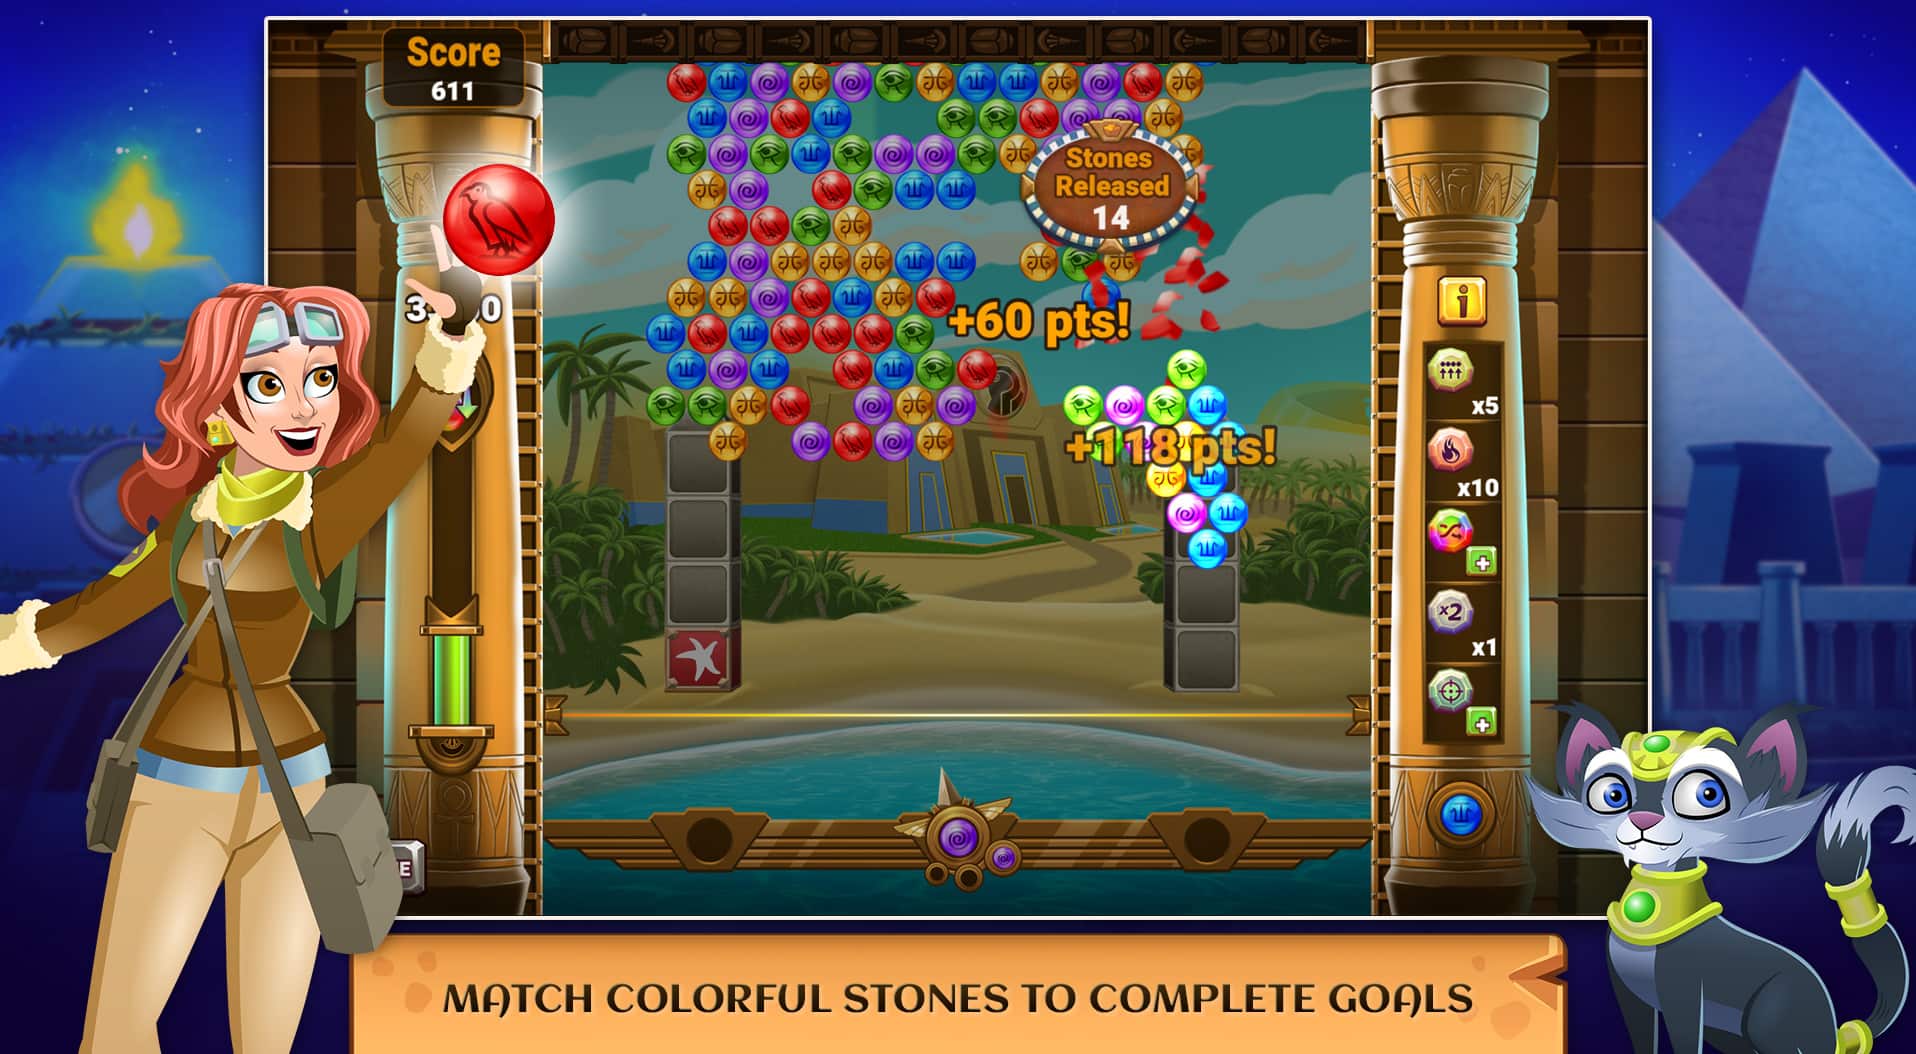 BUBBLES 2 - Play Online for Free!